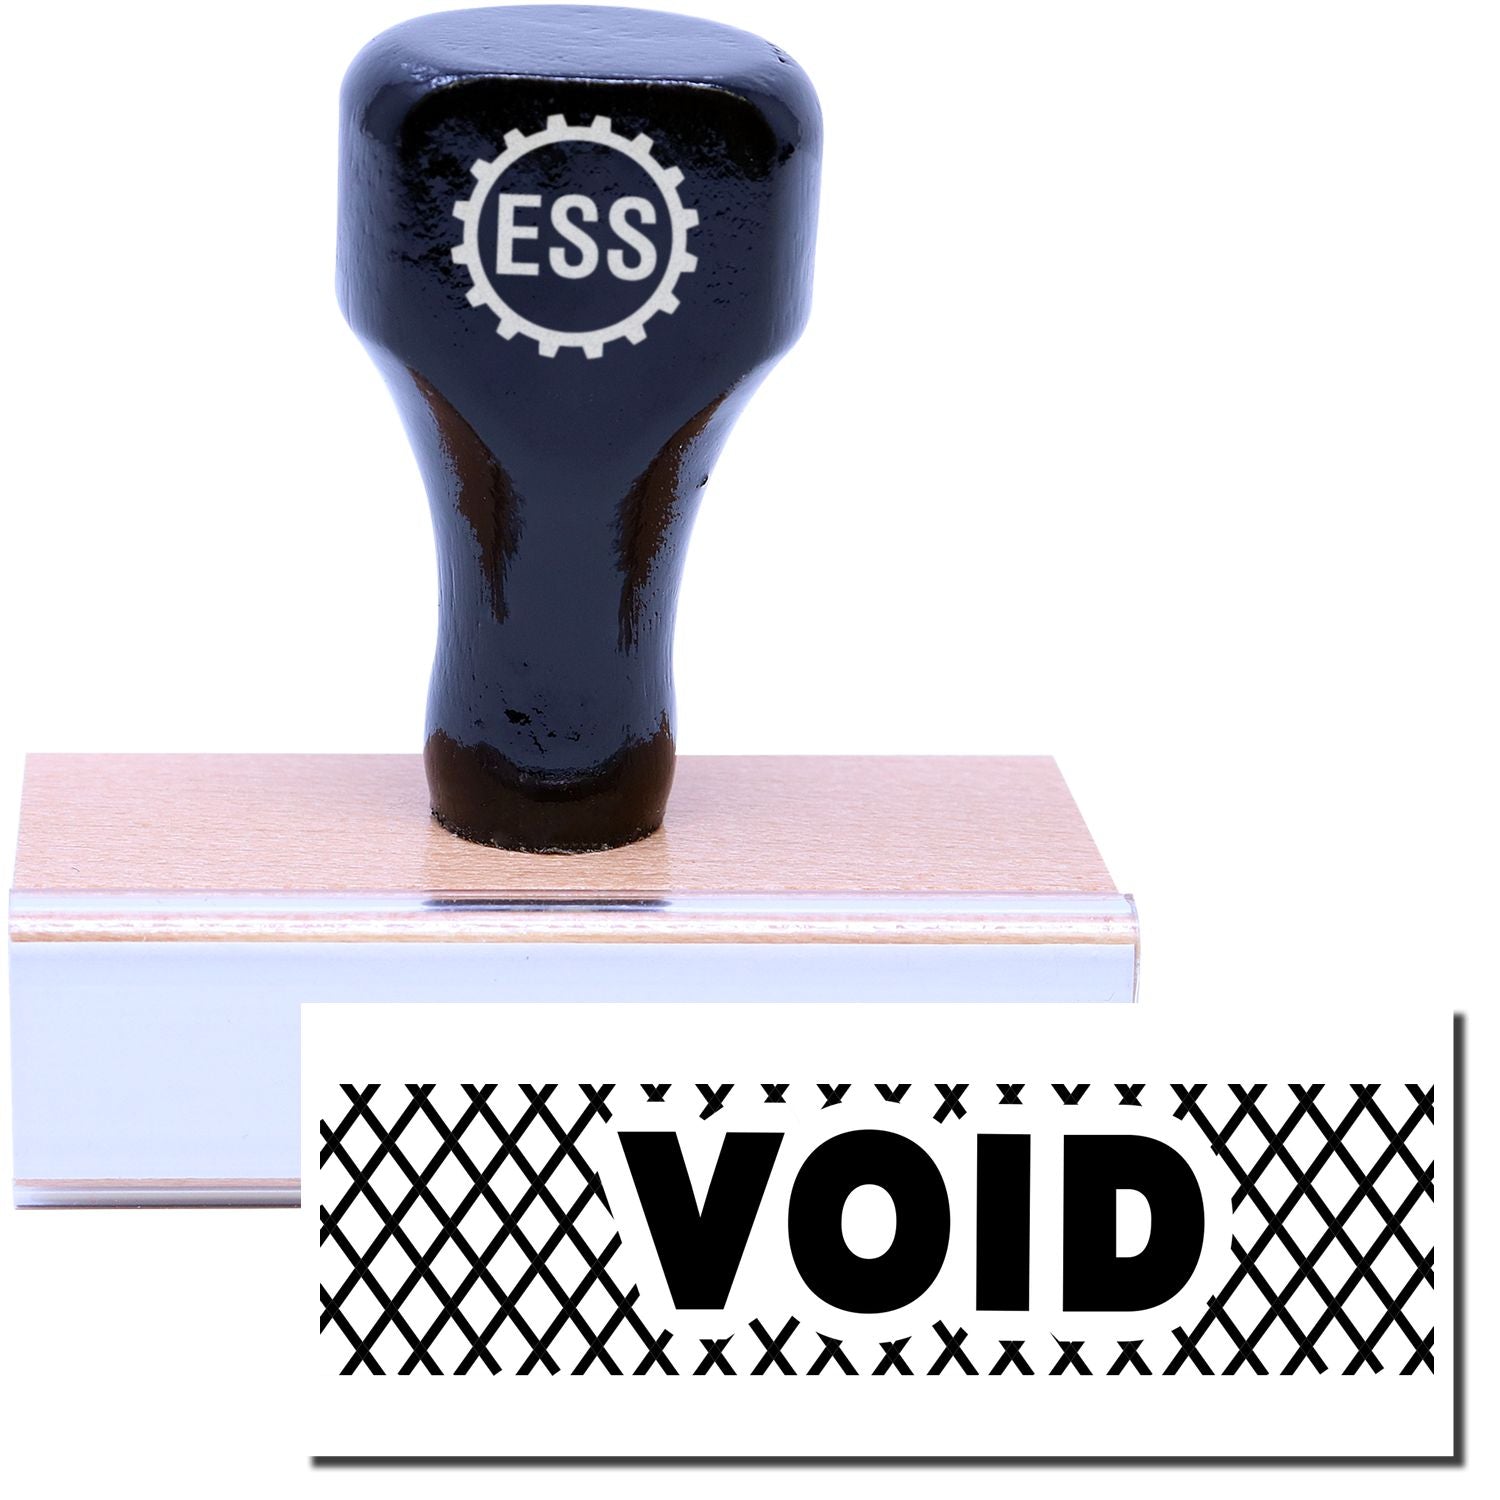 A stock office rubber stamp with a stamped image showing how the text "VOID" in a large font with strikelines all around the text is displayed after stamping.